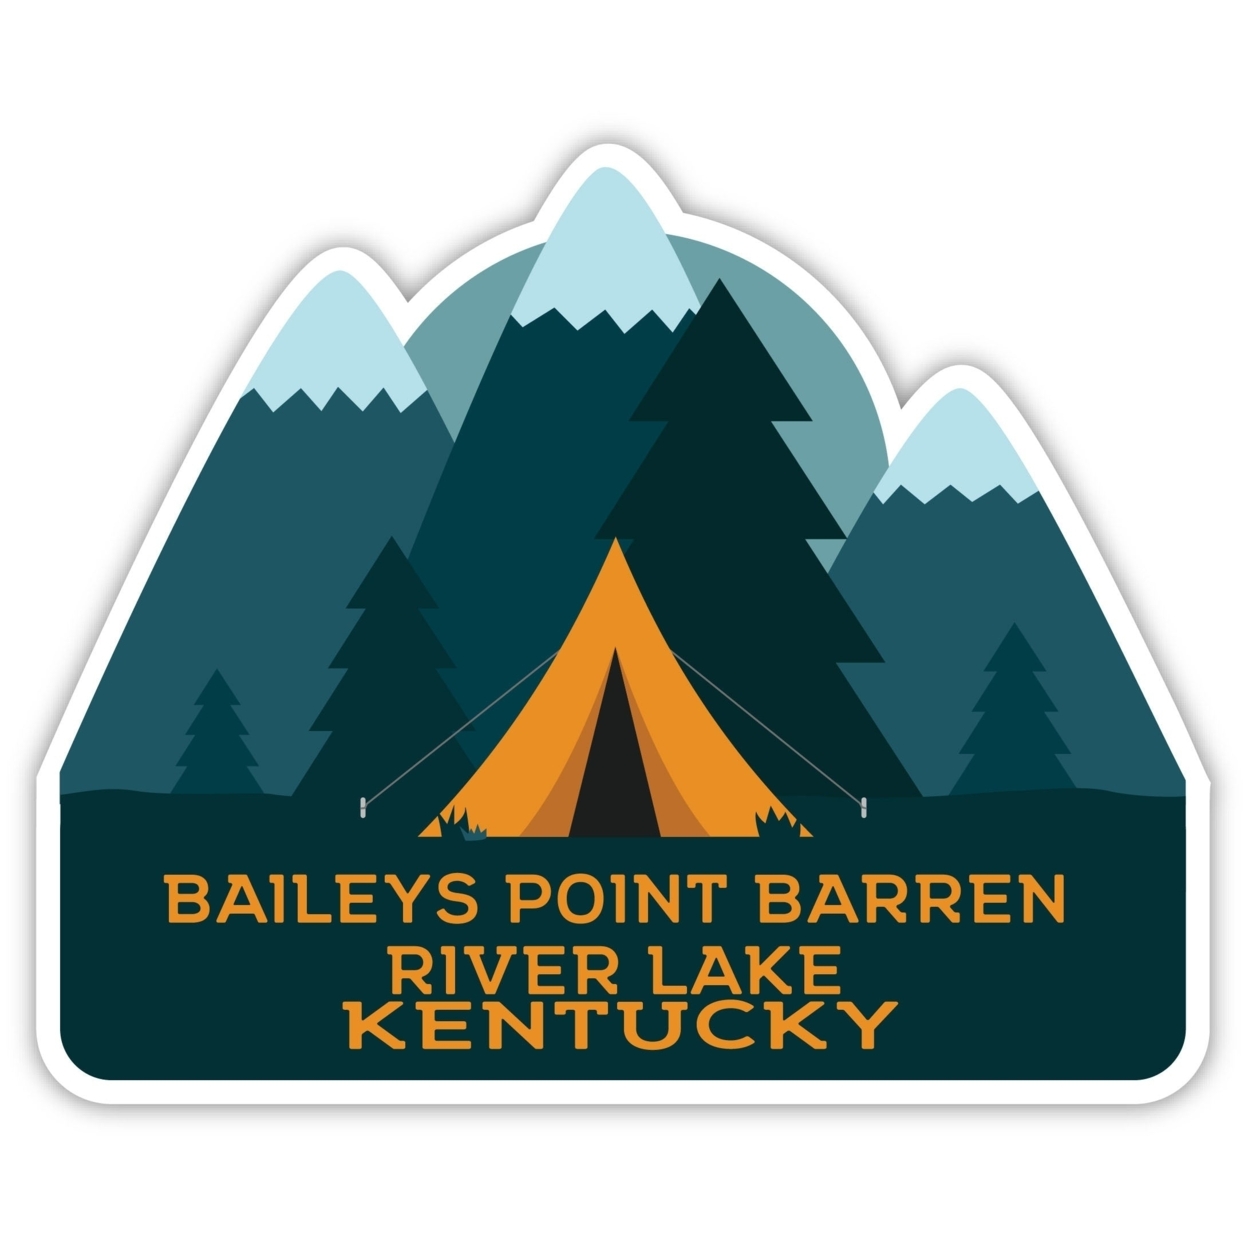 Baileys Point Barren River Lake Kentucky Souvenir Decorative Stickers (Choose Theme And Size) - 4-Pack, 4-Inch, Tent